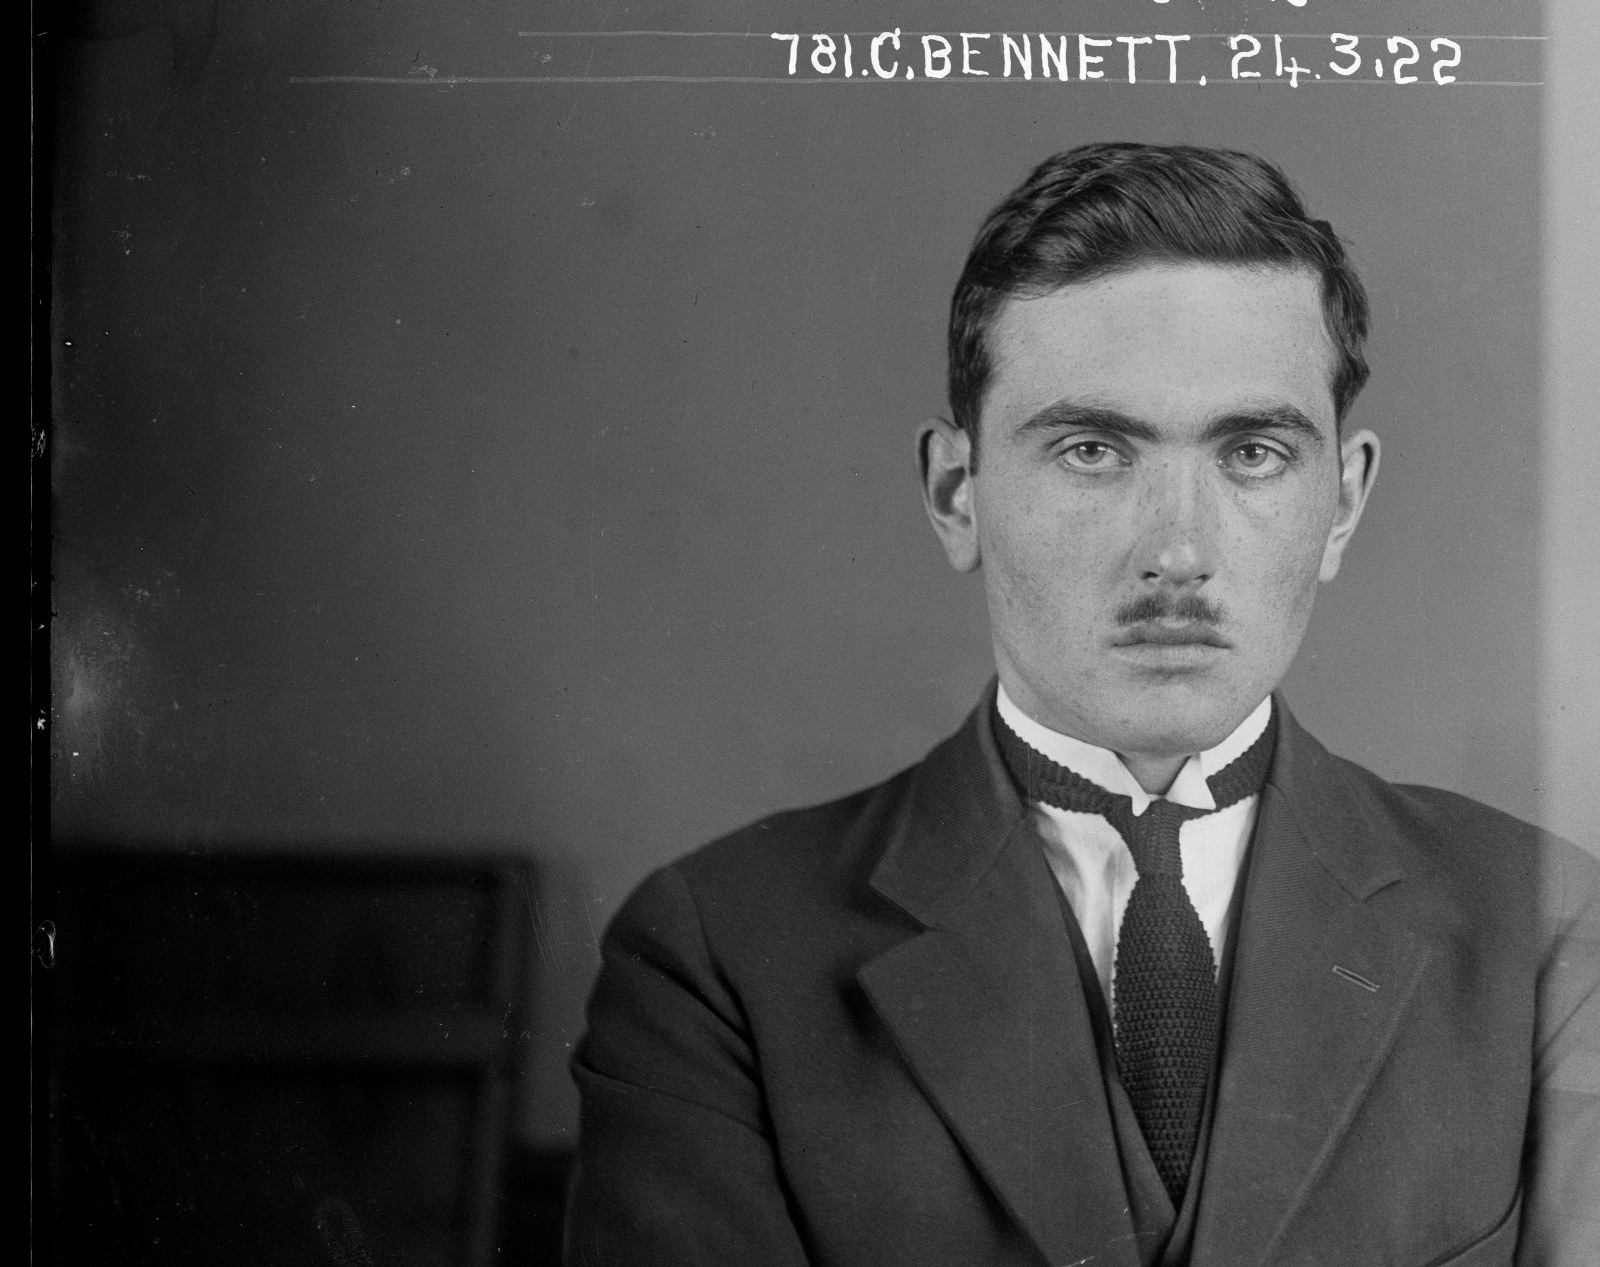 Cameron McIntosh Bean (alias Clifford Bennett), Special photograph number 781, 24 March 1922, possibly Central Police Station, Sydney 